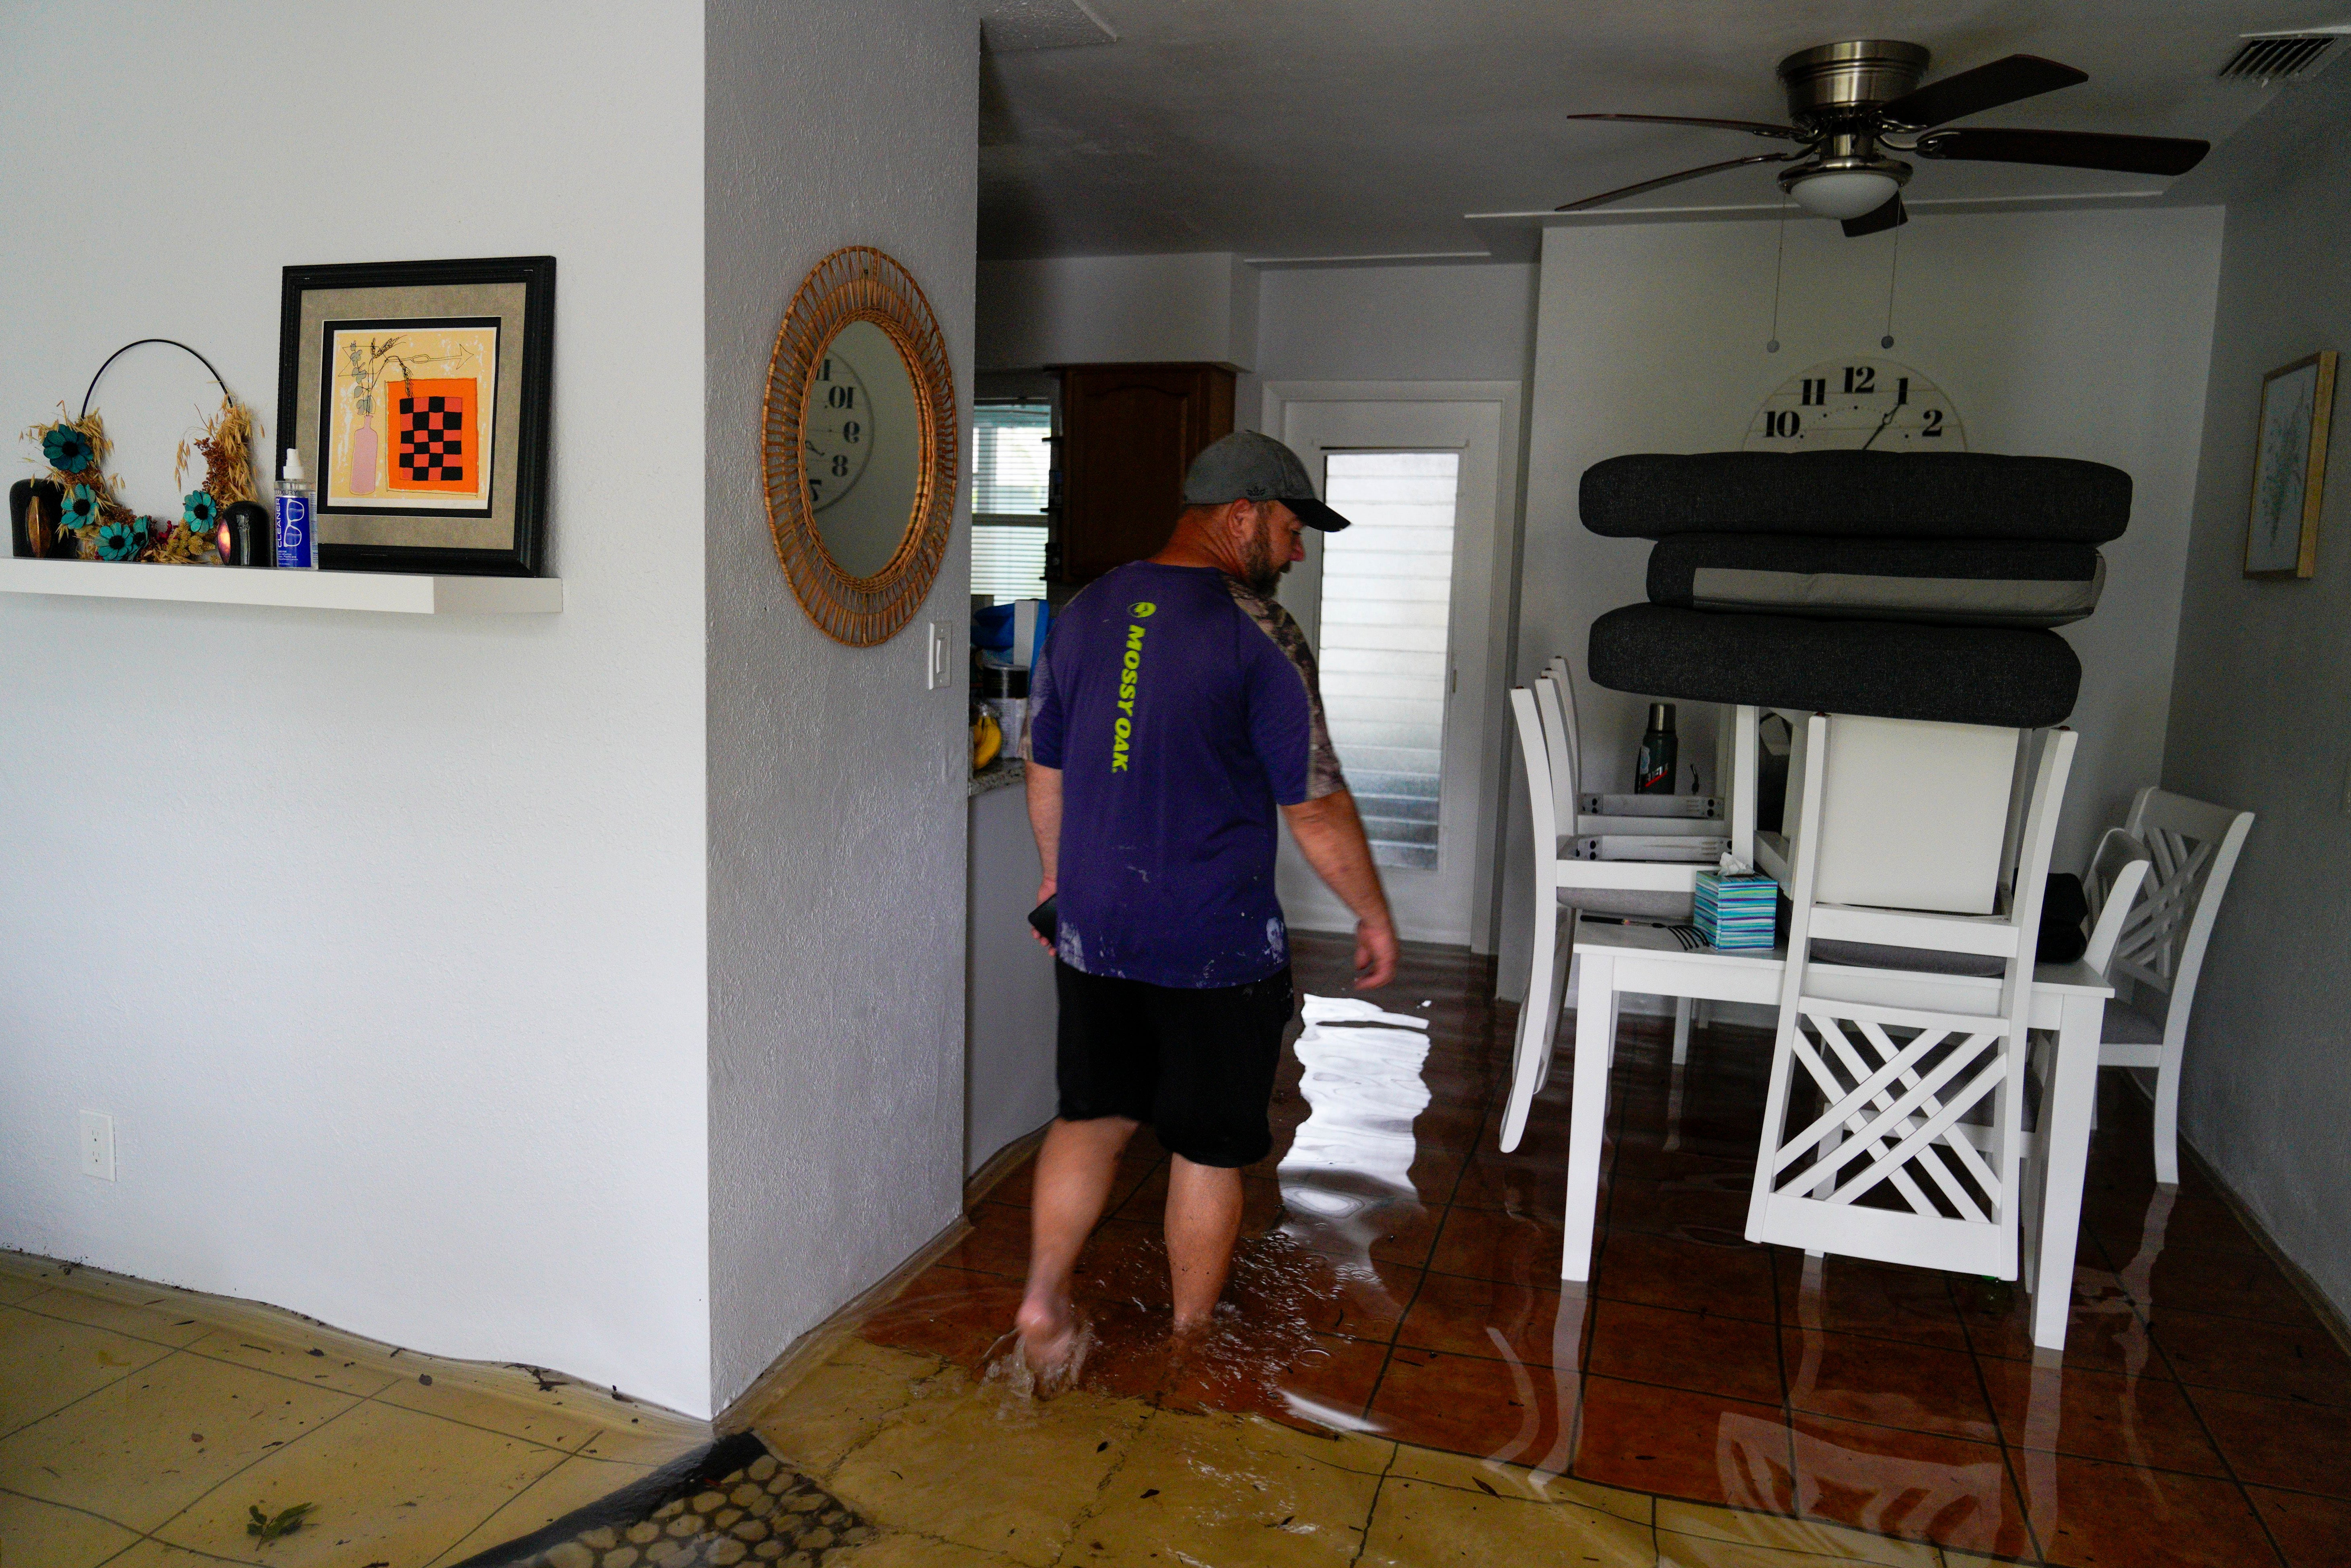 Chad Hinchman, 40, walks through one of his rental Airbnb properties on Hibiscus Avenue South, Pasadena, which flooded overnight